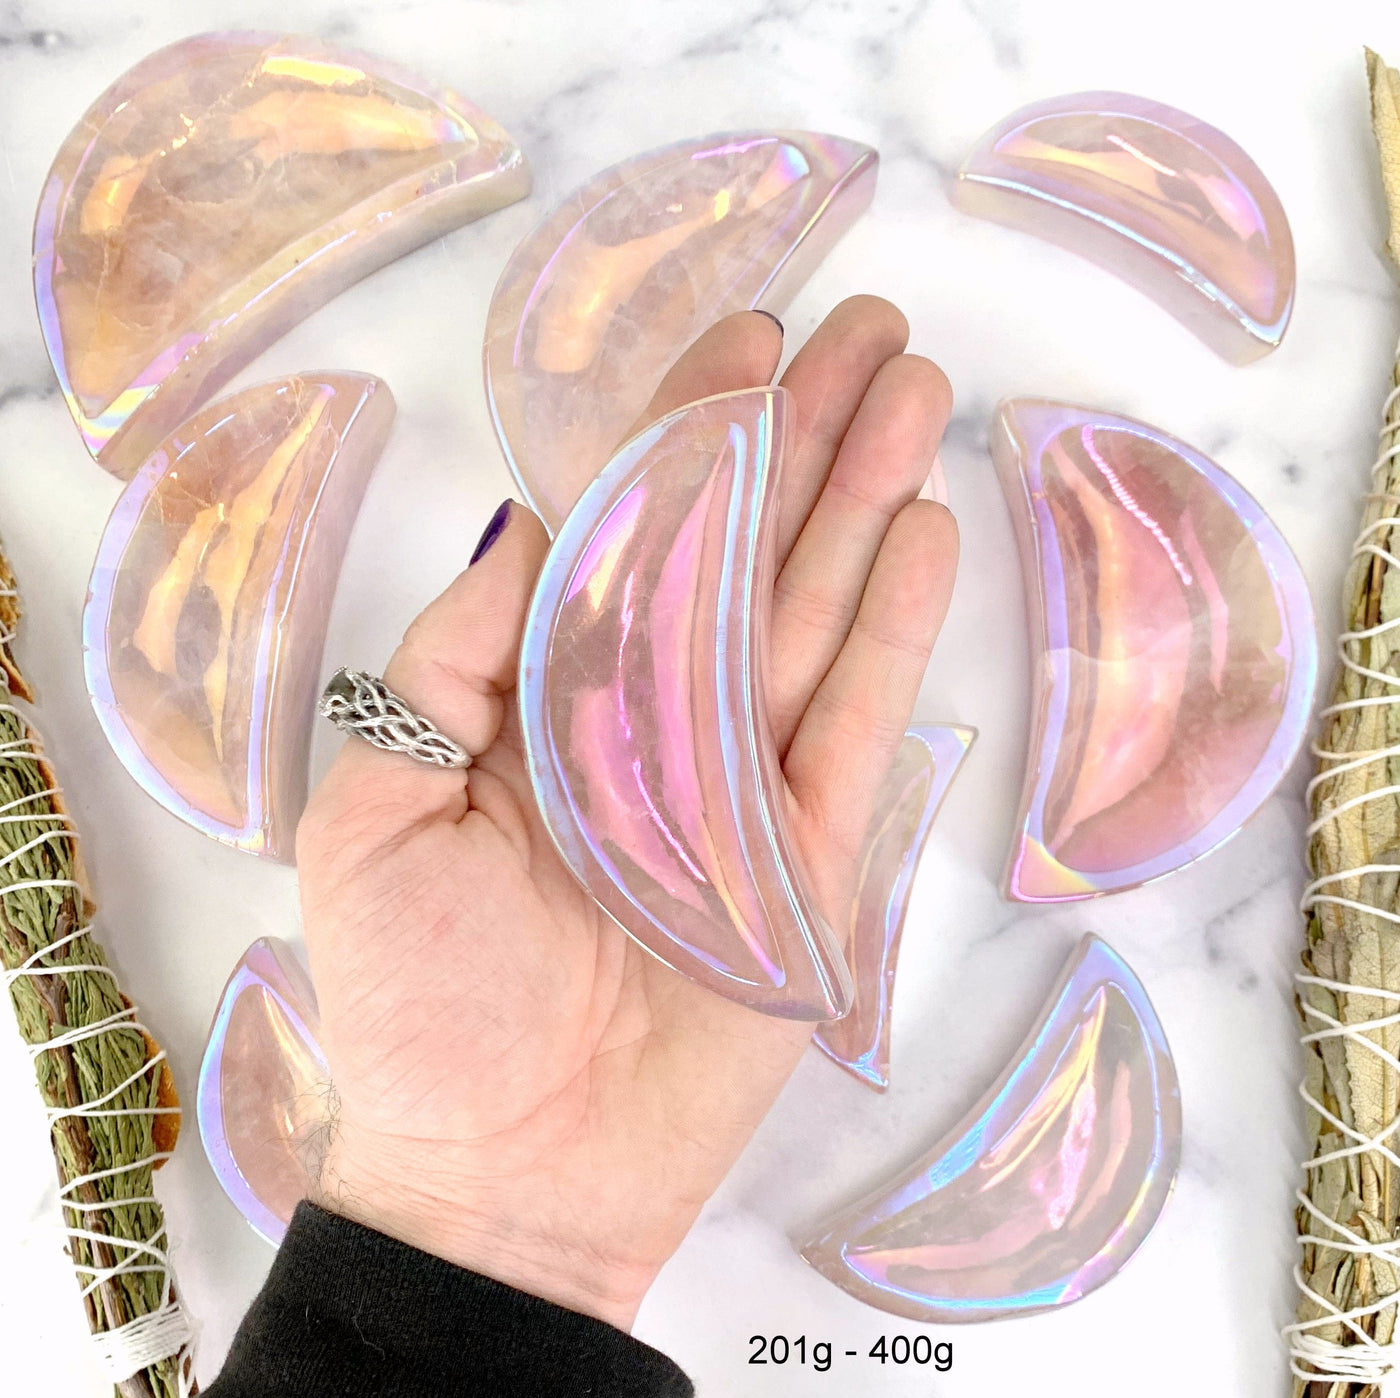 one 201gram - 400gram angel aura moon bowl in hand with marble background for size reference